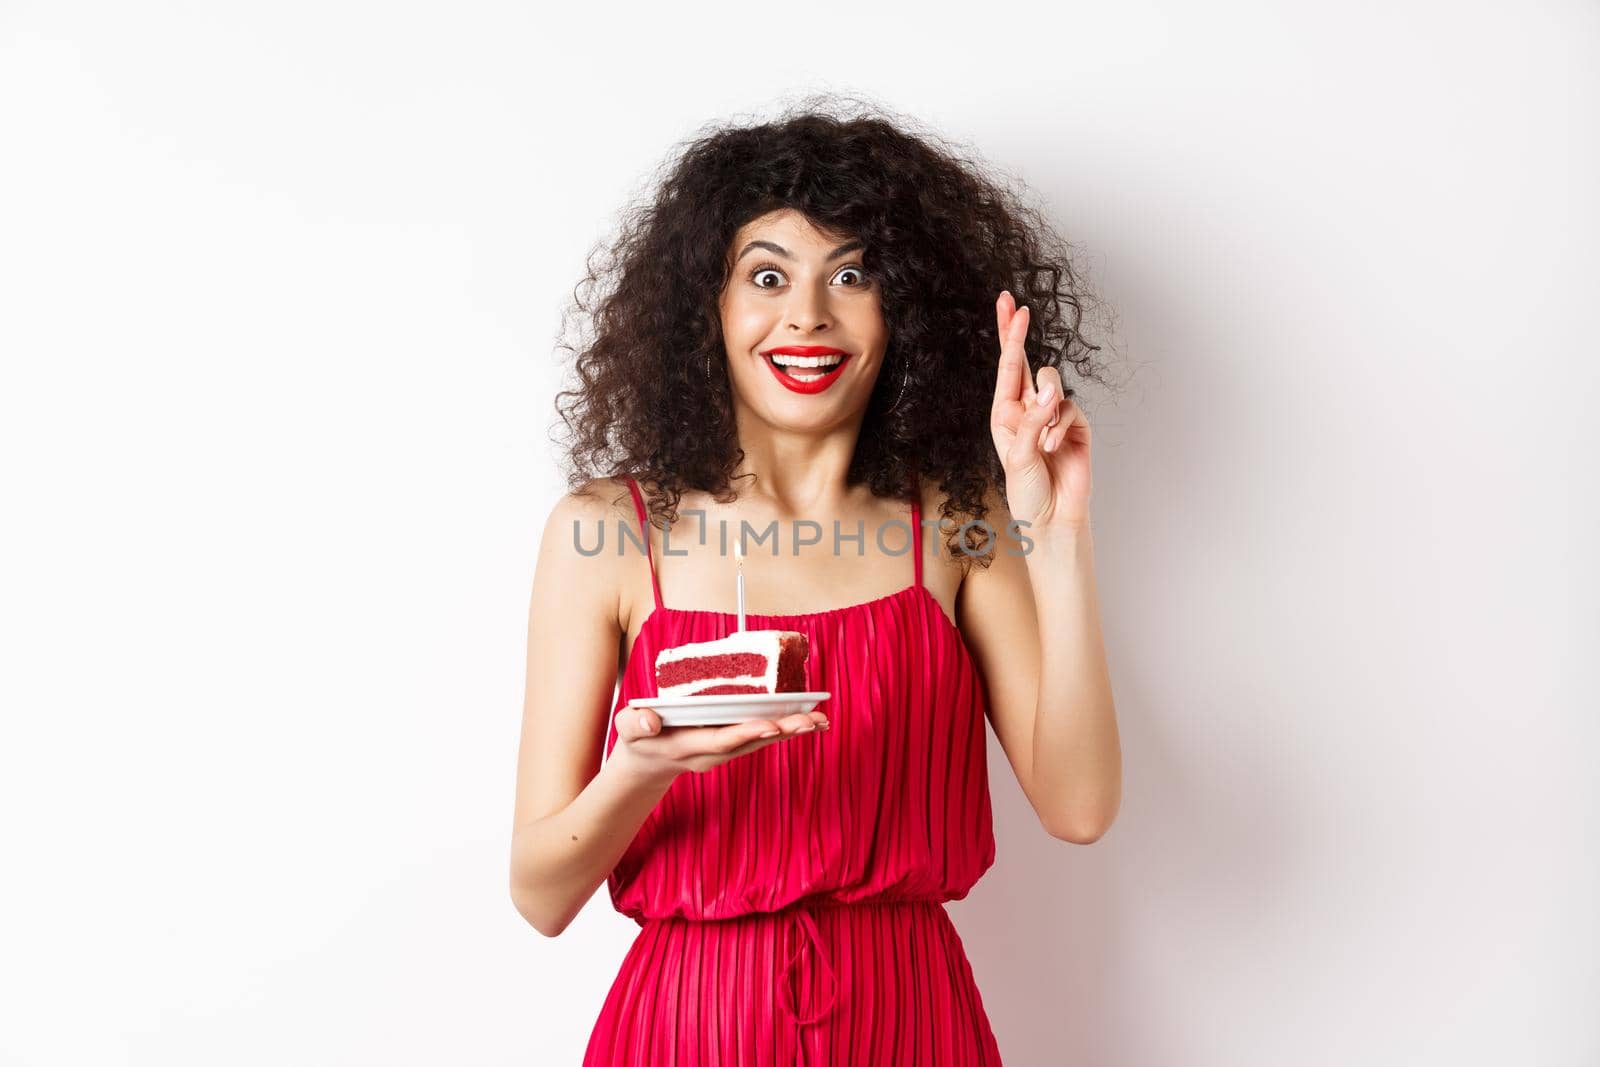 Excited birthday girl in red dress, cross fingers while making wish and blowing candle on bday cake, smiling happy, white background.